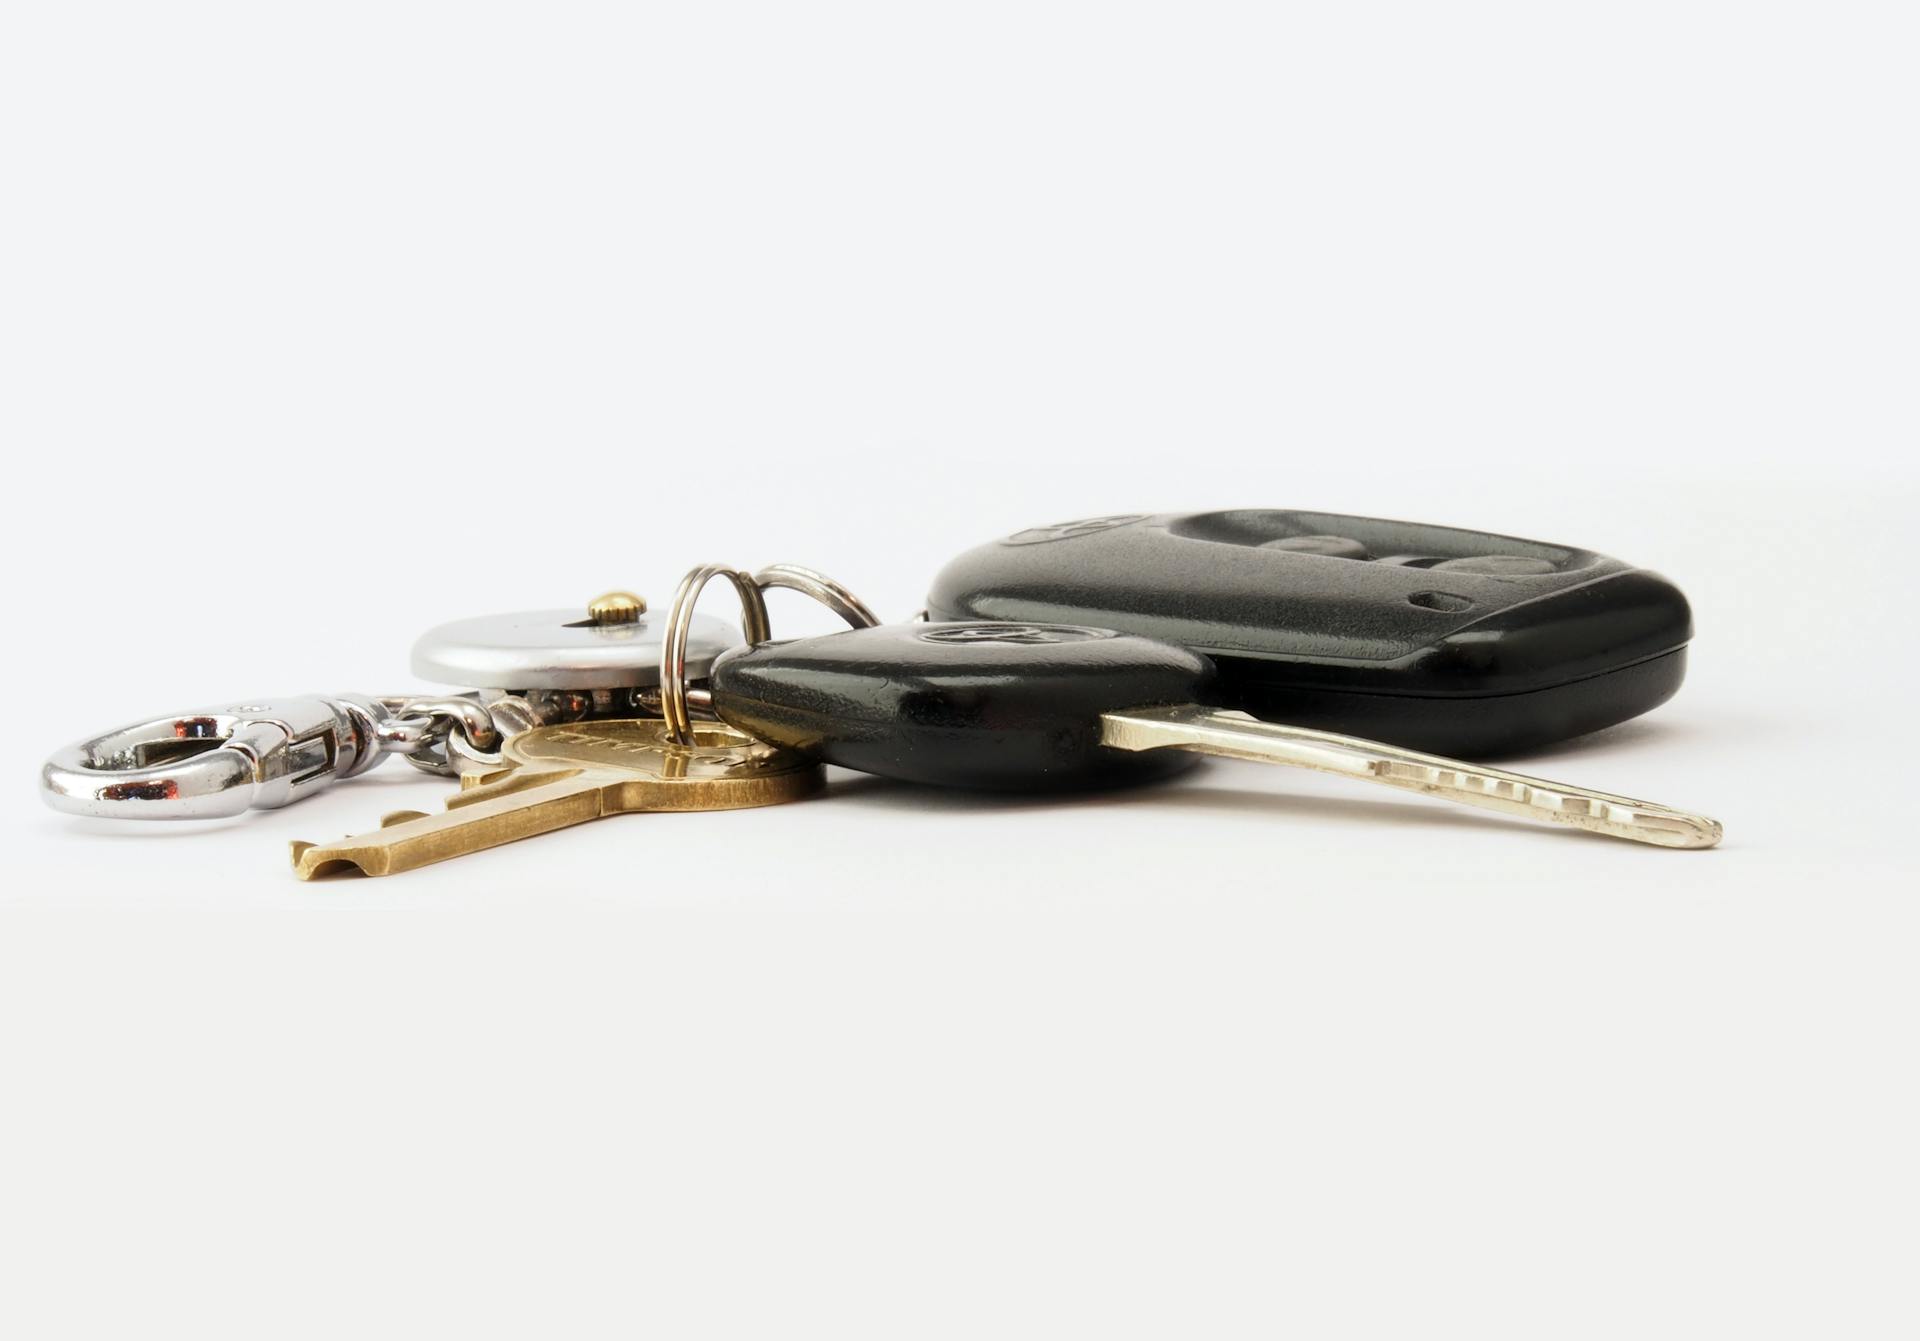 Car keys on a white surface | Source: Pexels